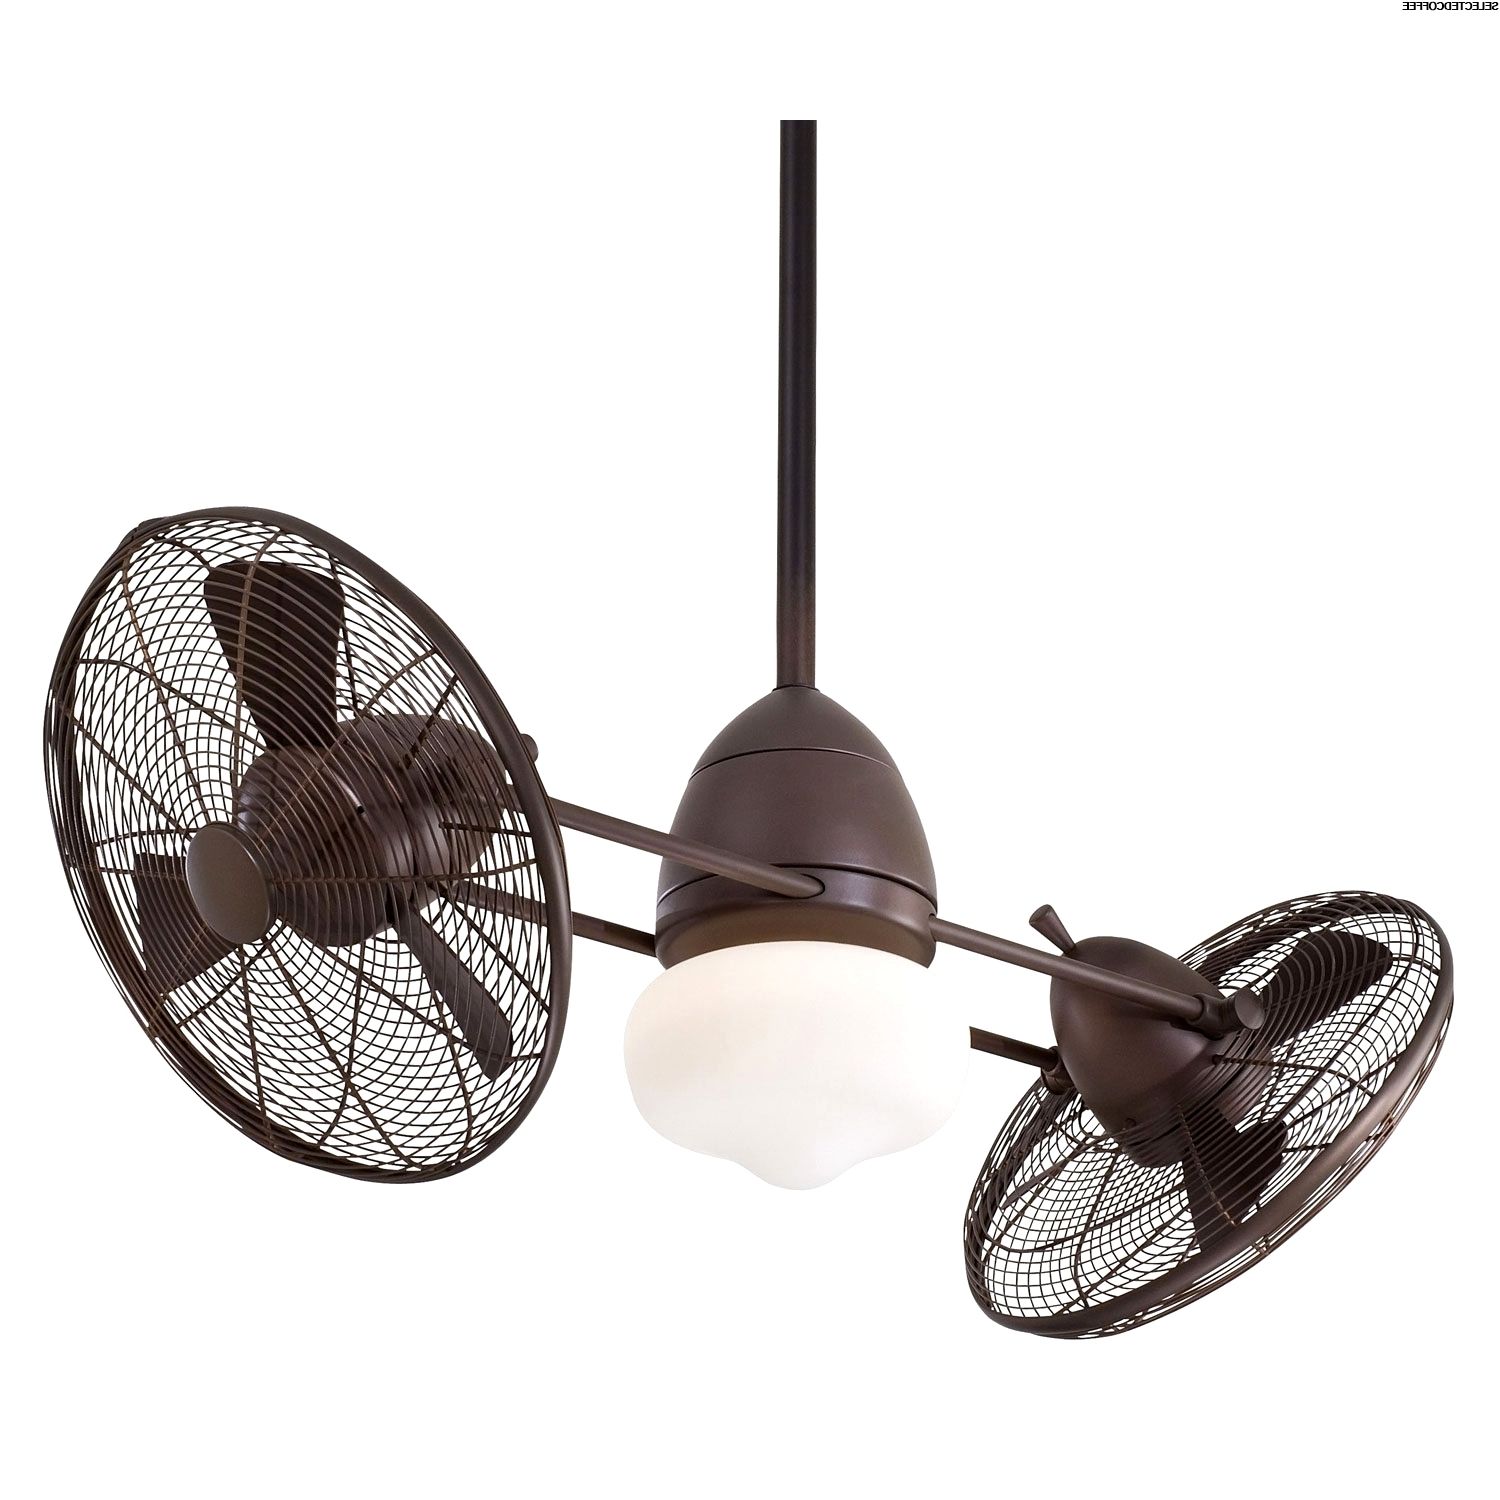 Outdoor Ceiling Fans With Covers Intended For Newest 49 Hd Outdoor Fan With Light Gallery (View 15 of 20)